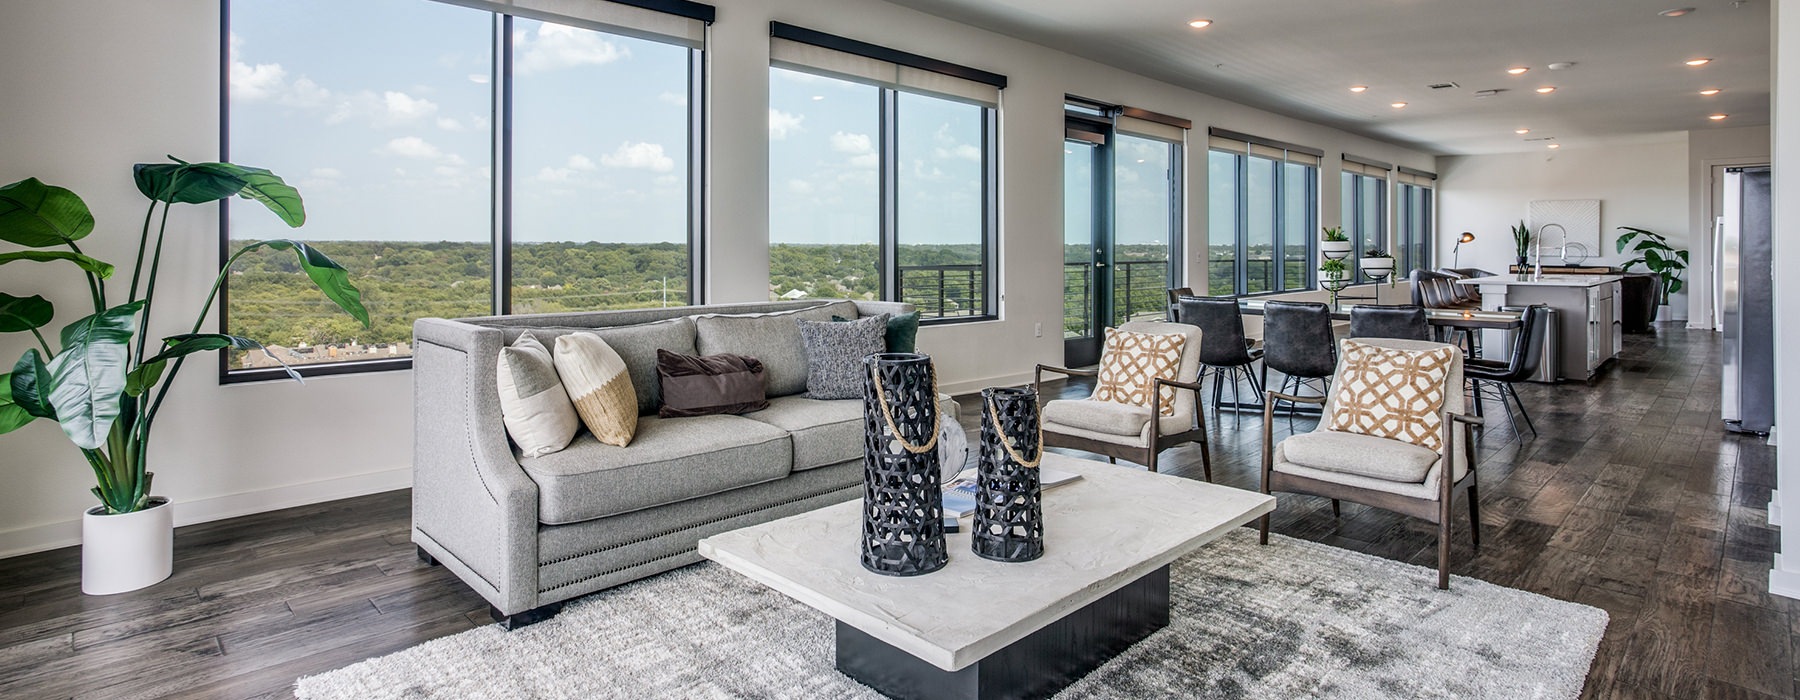 Large Windows With Great View In Apartment Penthouse At The Drake